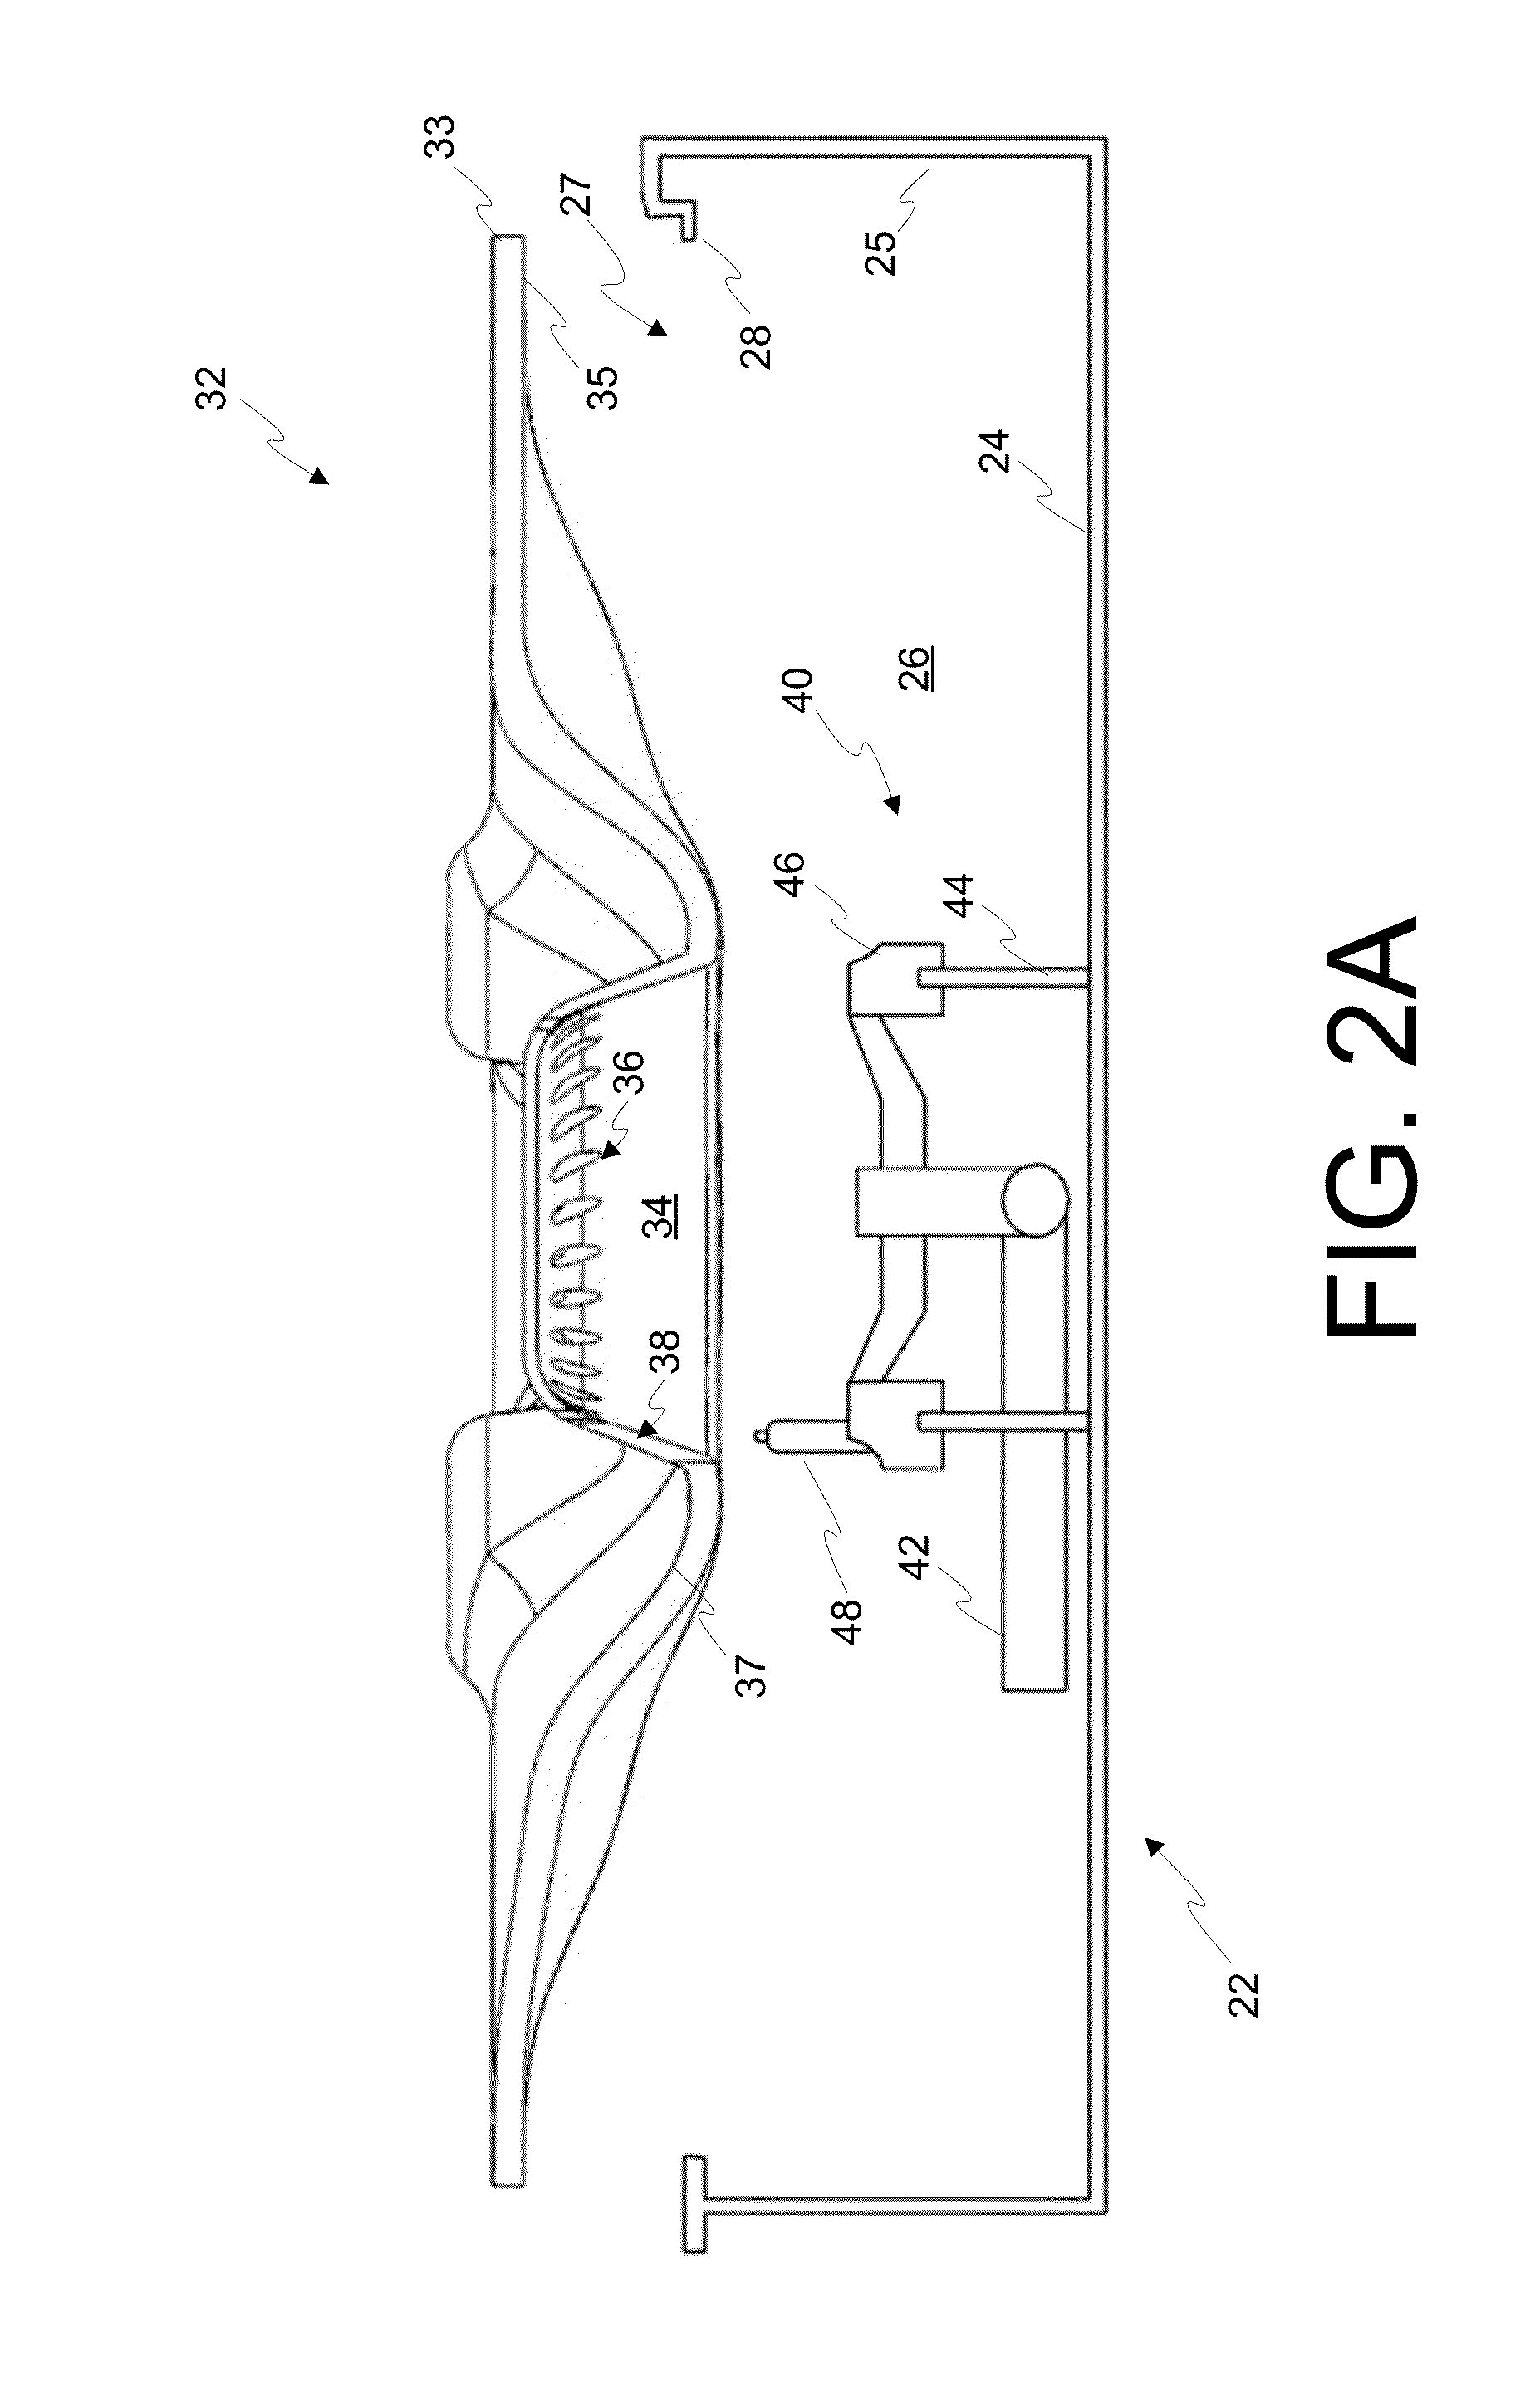 Integrated cooktop assembly